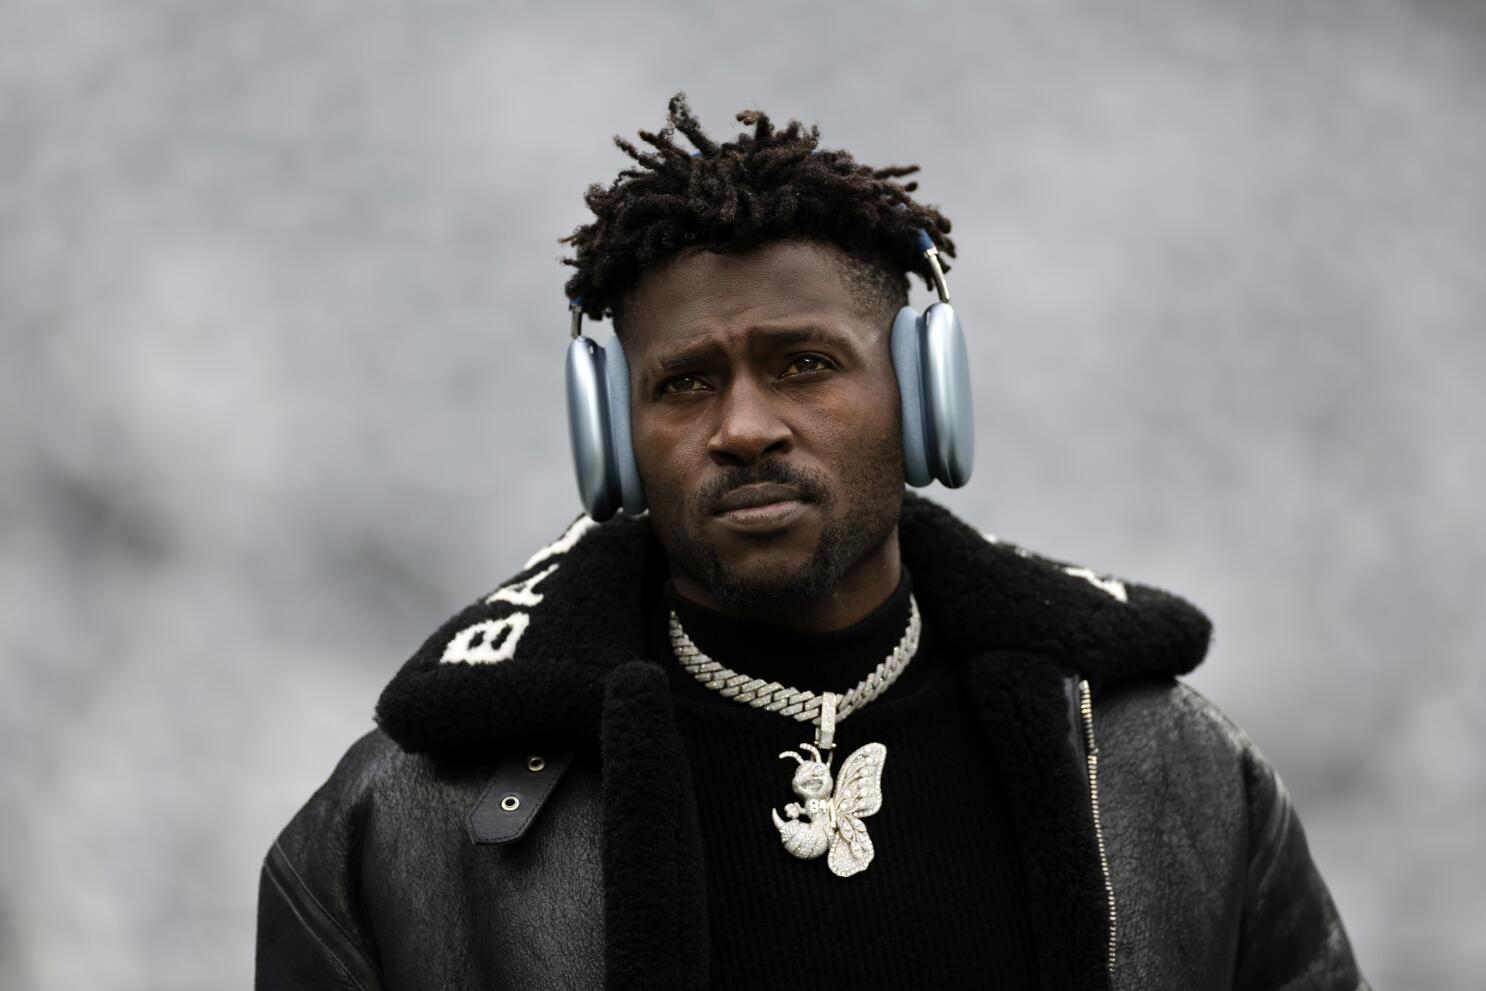 An NFL team will sign Antonio Brown, who says he's done - Los